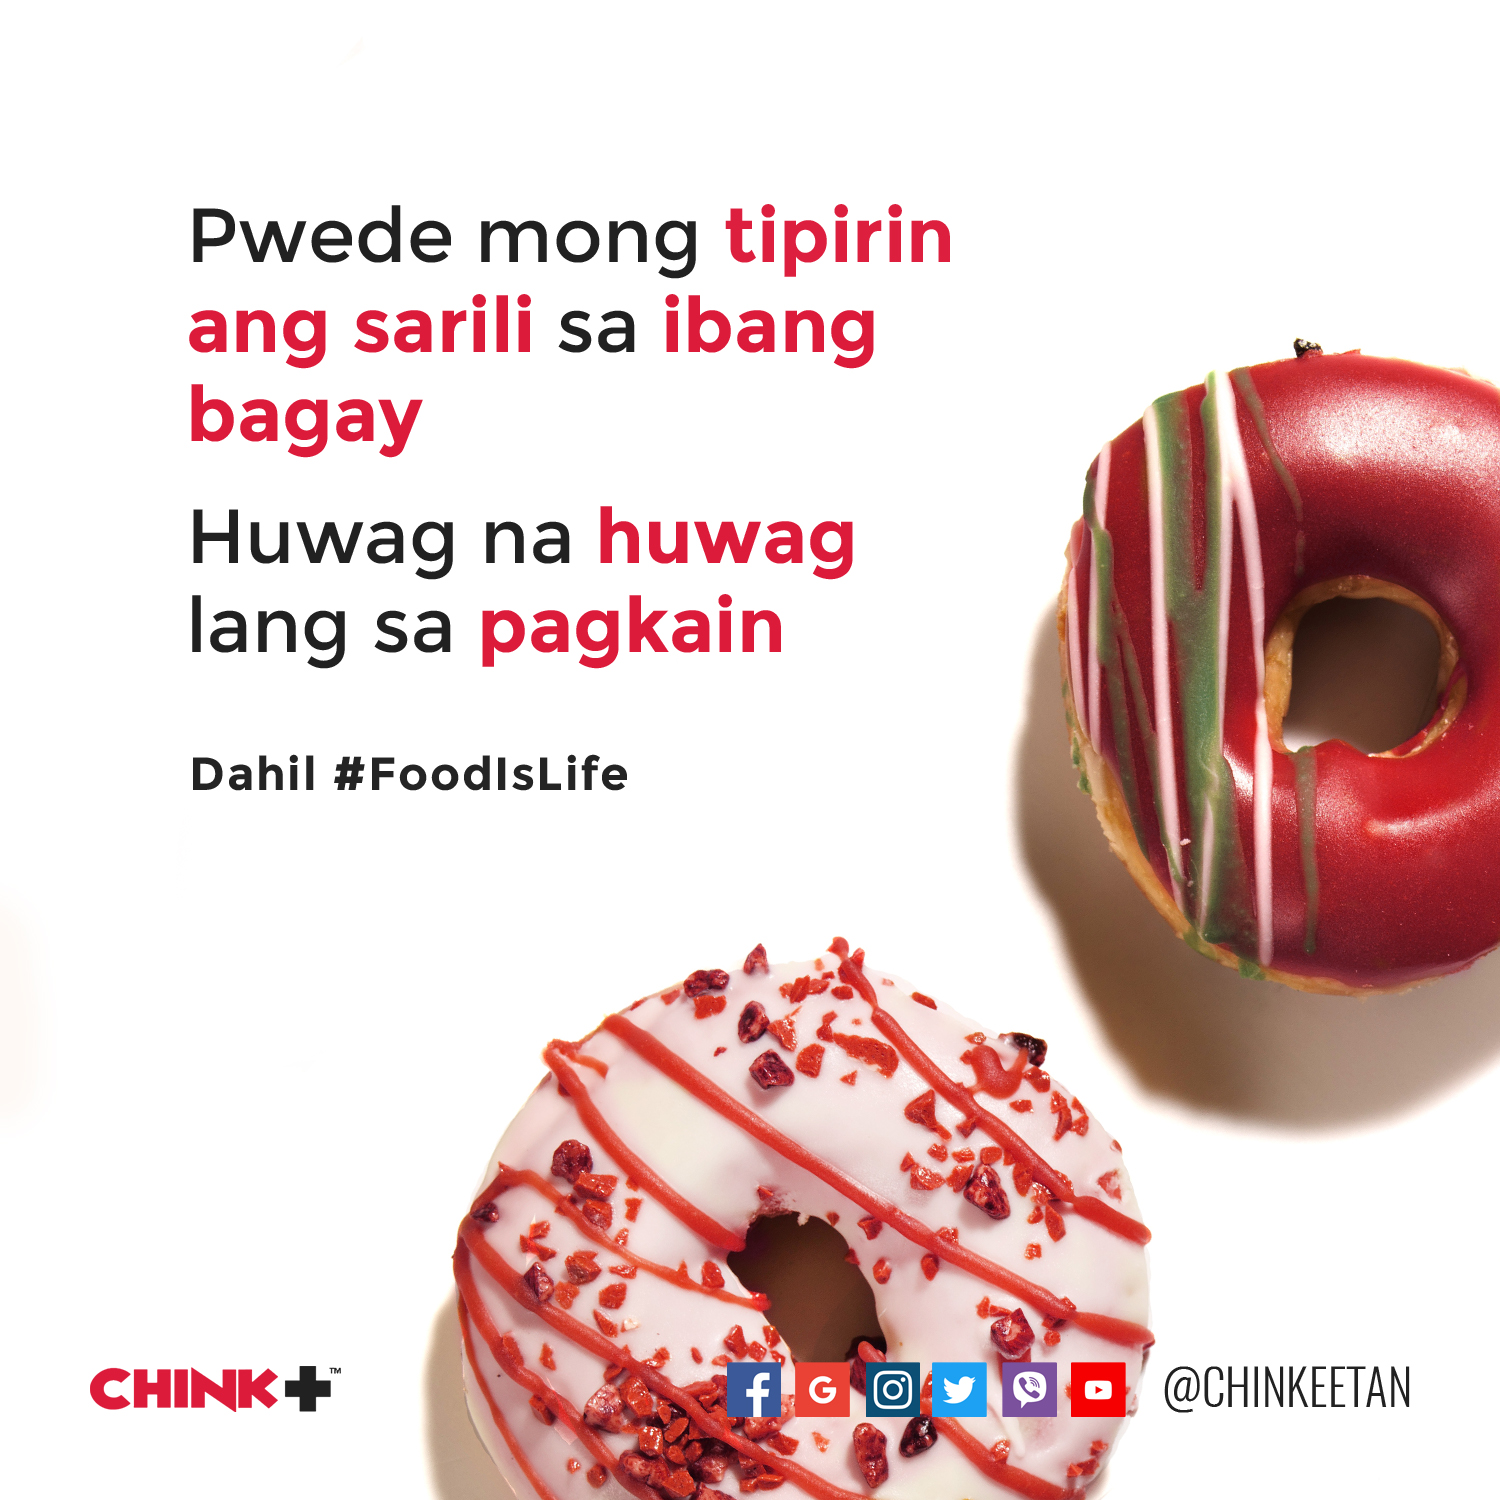 FOOD IS LIFE | Chinkee Tan, Wealth Coach Philippines